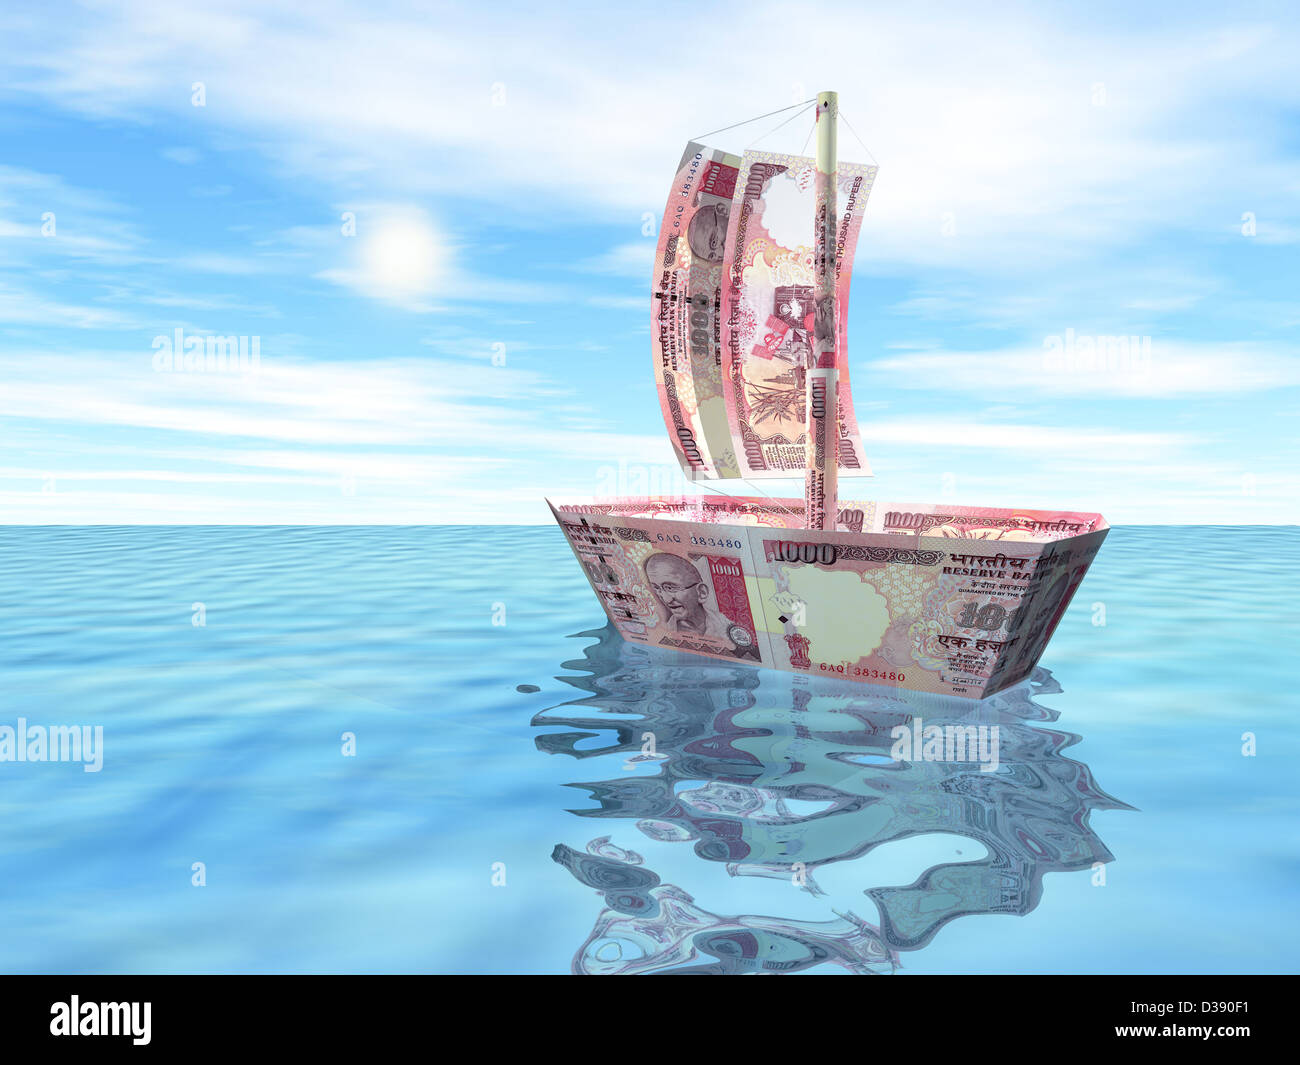 Boat with Indian currency notes Stock Photo